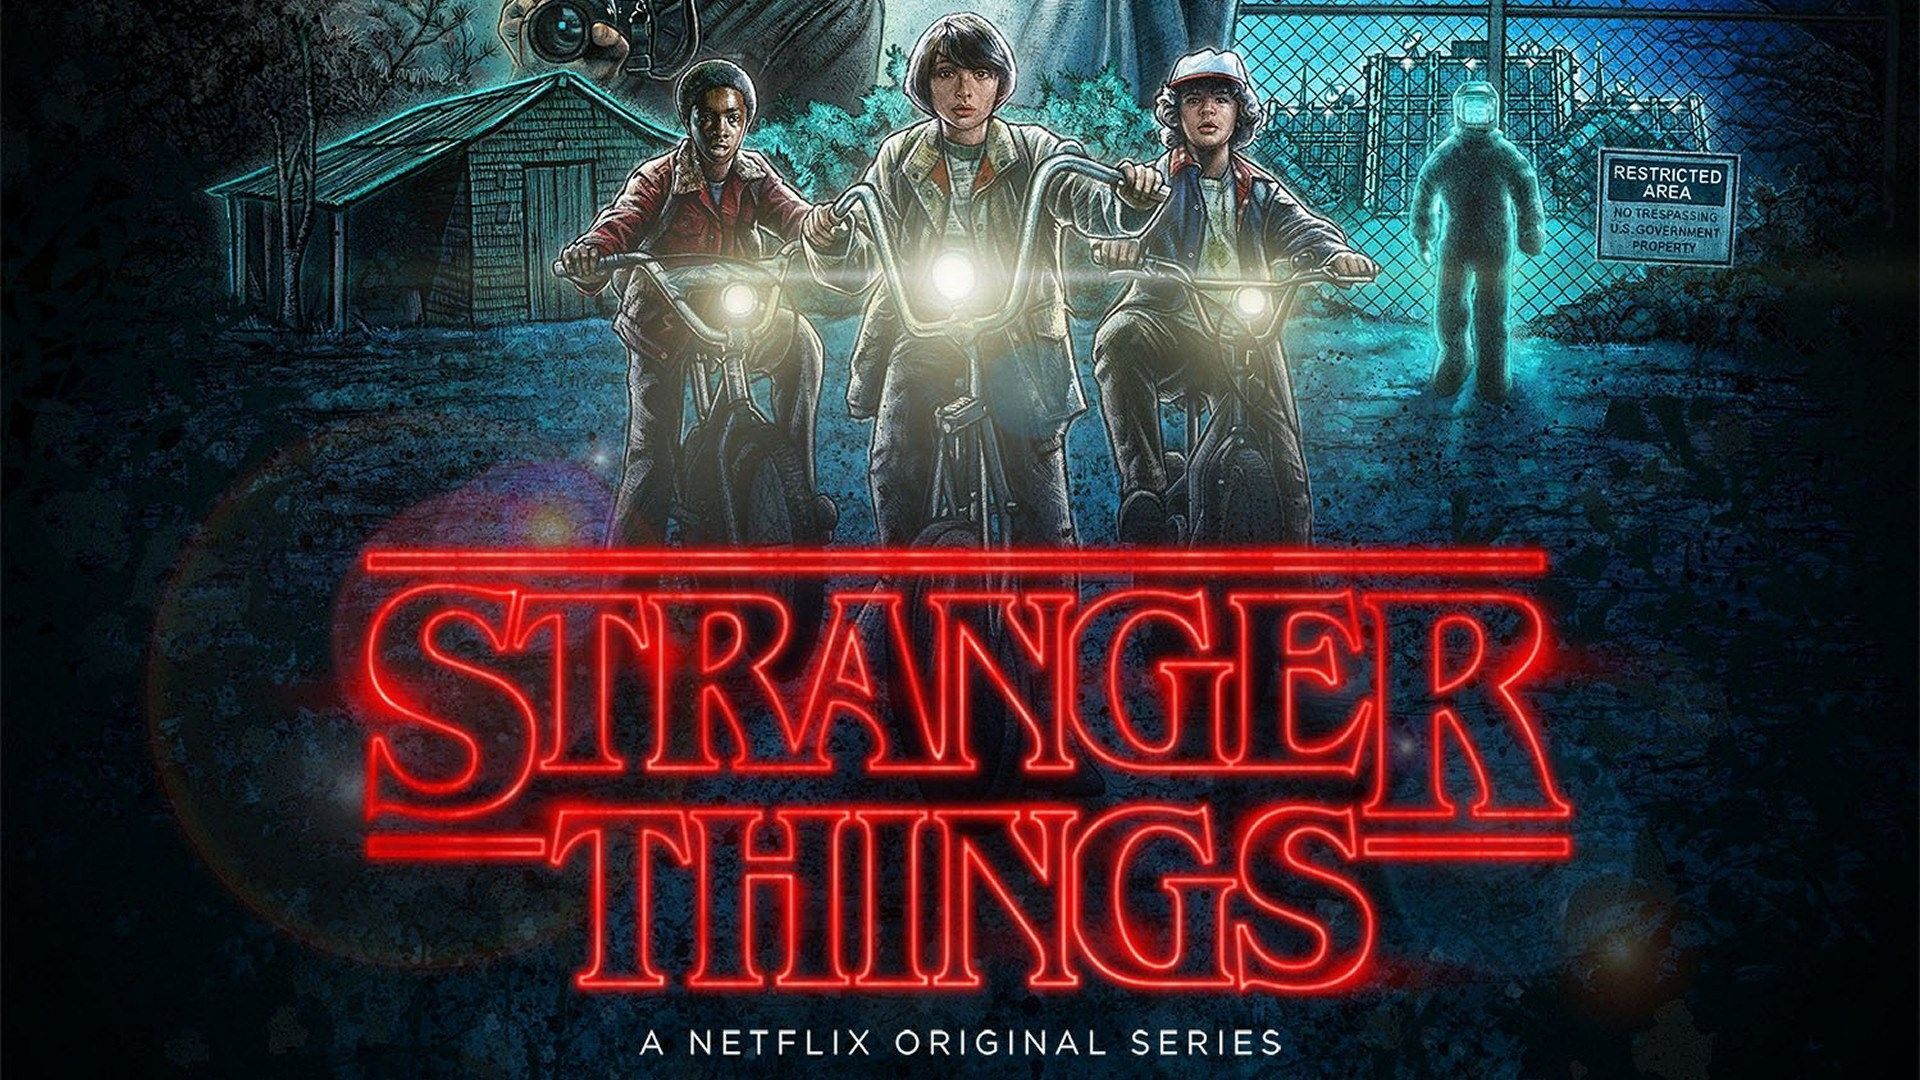 Stranger Things is a Netflix original series that is a thrilling and nostalgic ride through the 80s. - Netflix